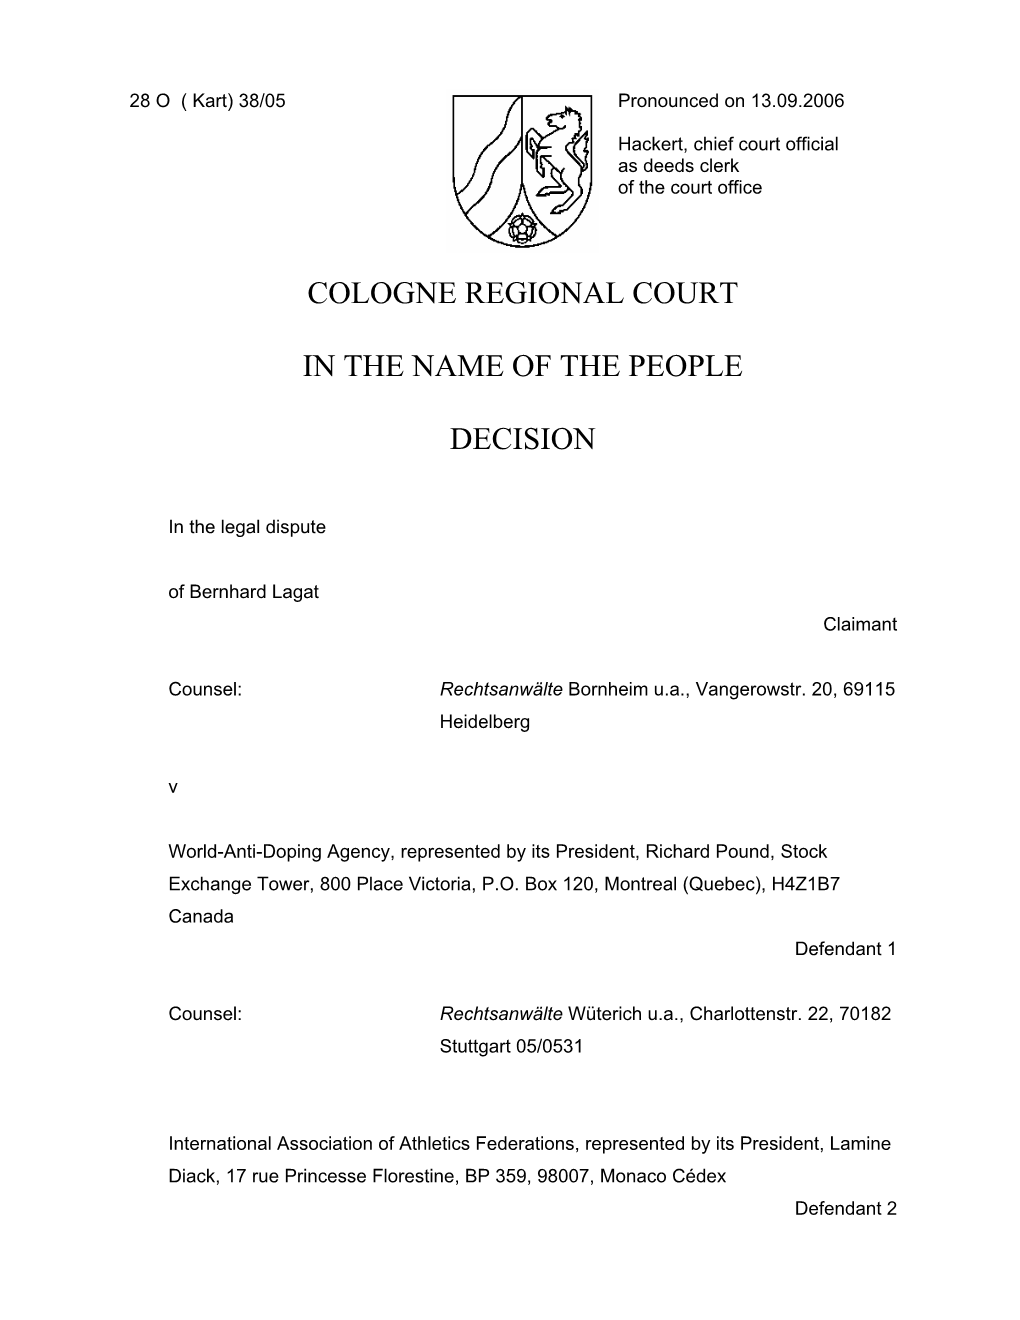 Cologne Regional Court in the Name of The